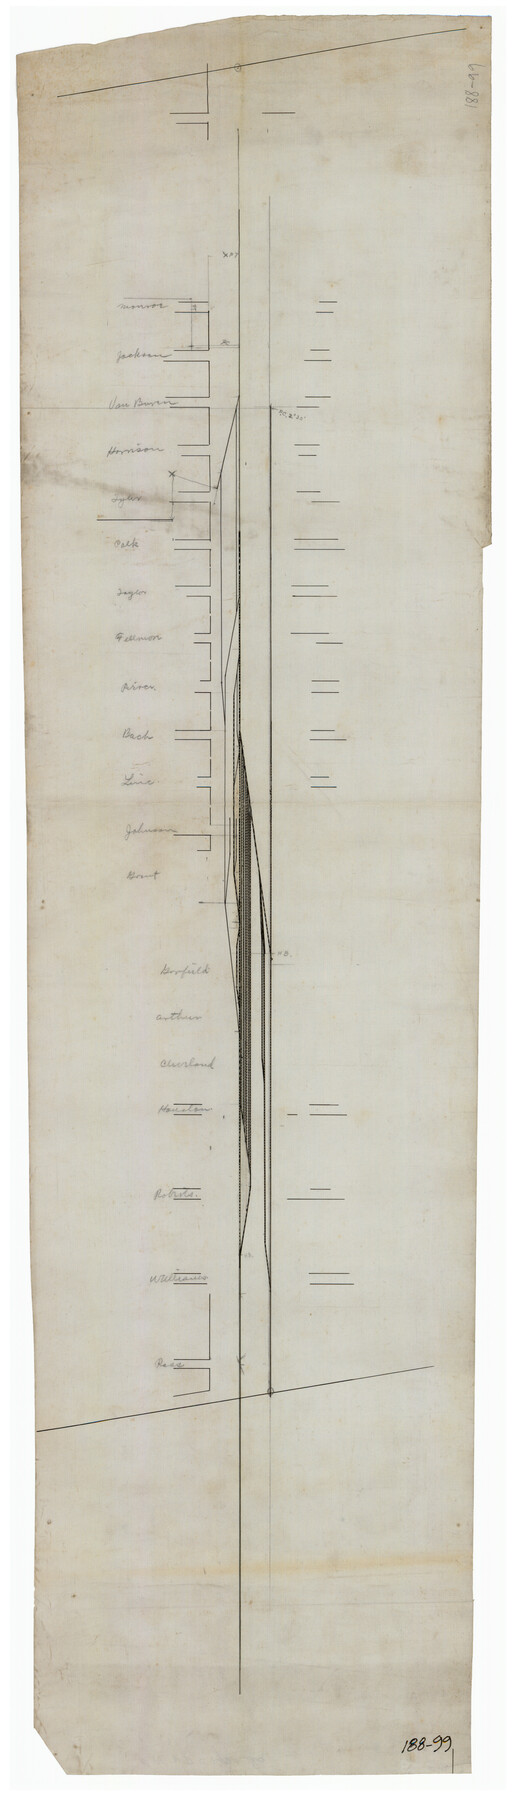 91830, [Sketch of Railroad Switchyard stretching from Ross to Monroe Streets, Amarillo, Texas], Twichell Survey Records